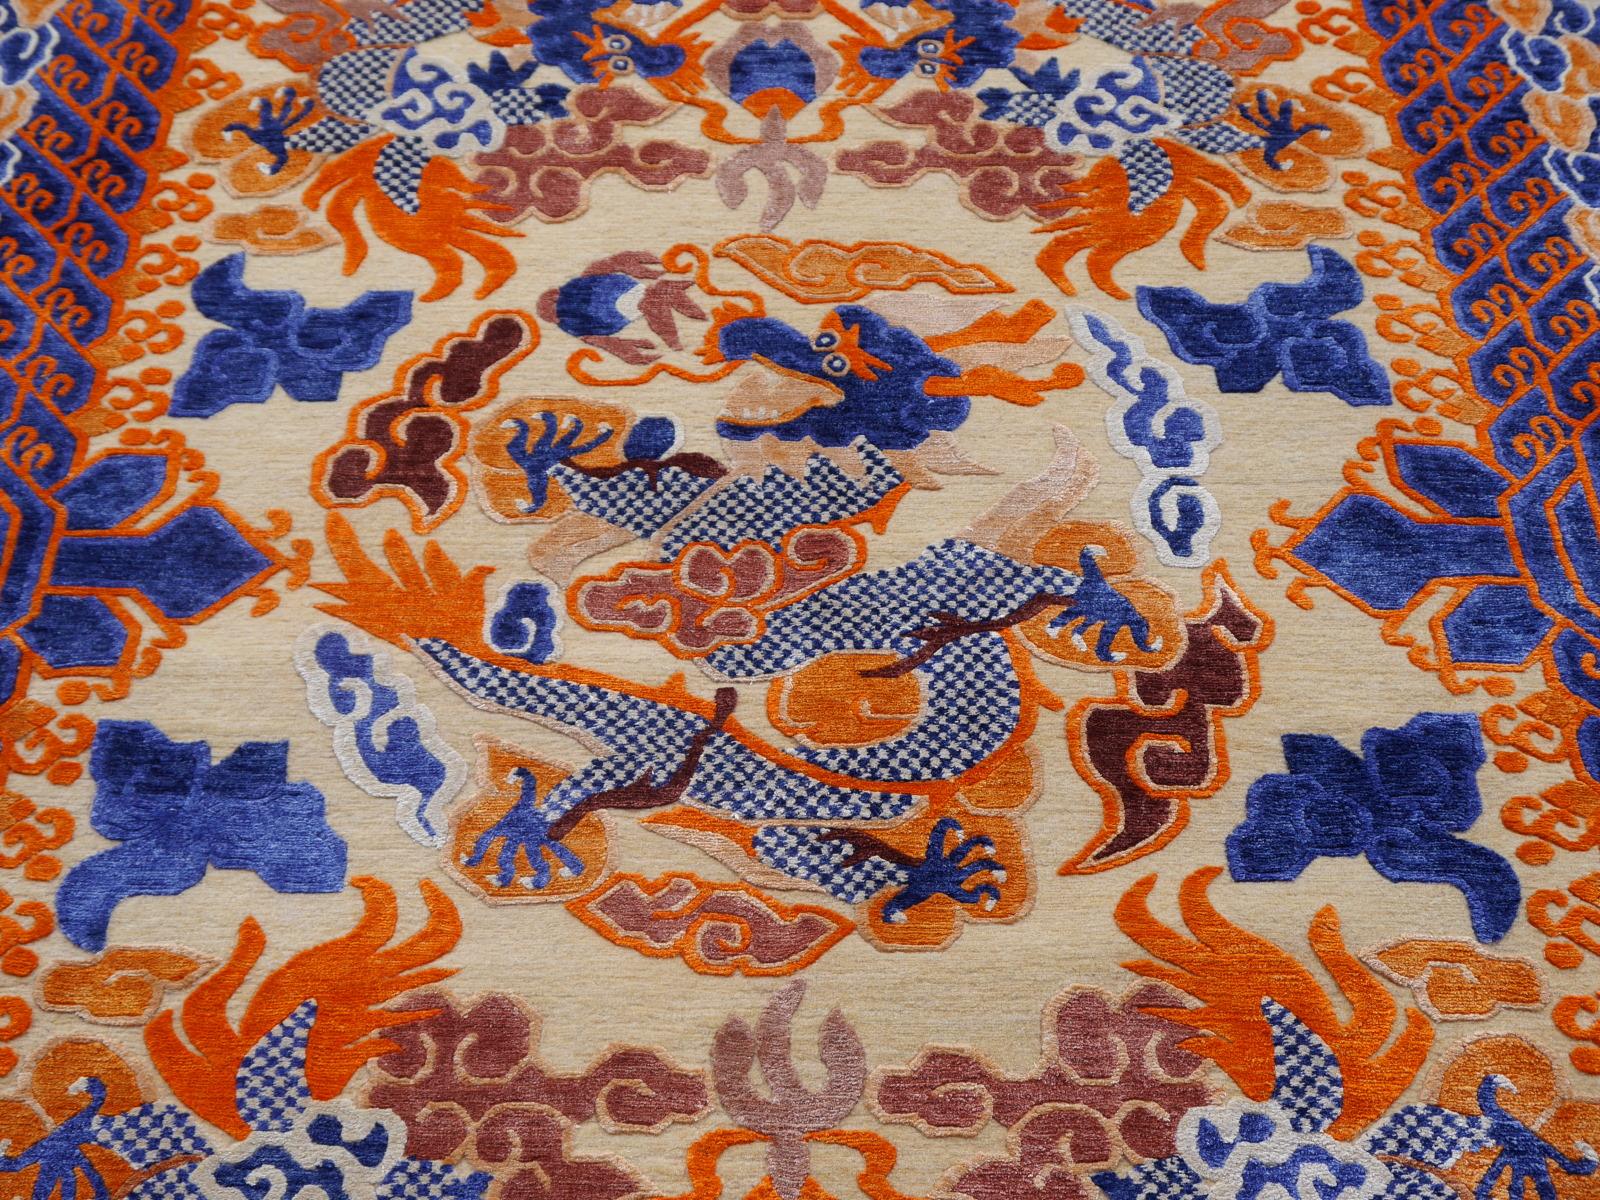 Dragon Design Rug Wool and Silk in Style of Chinese Kansu Carpets For Sale 2